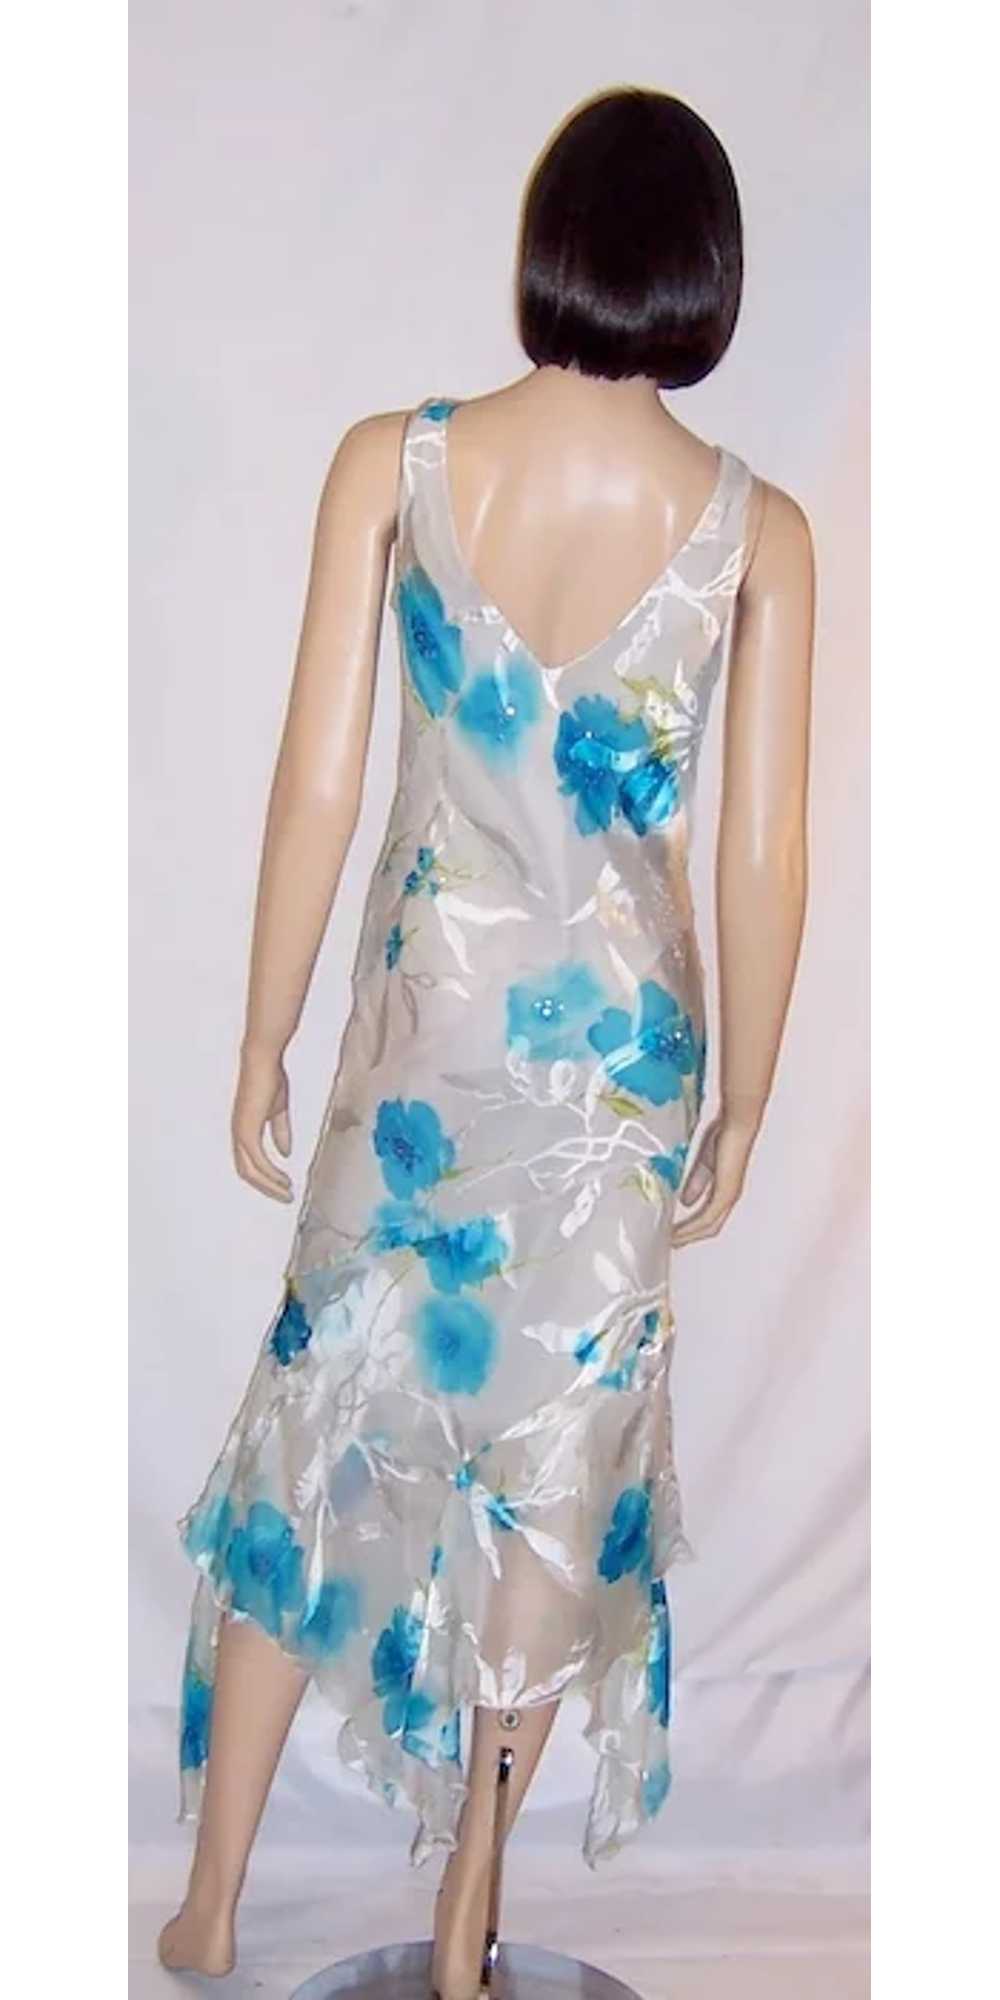 Printed Turquoise & White Silk Gown with Beadwork - image 4